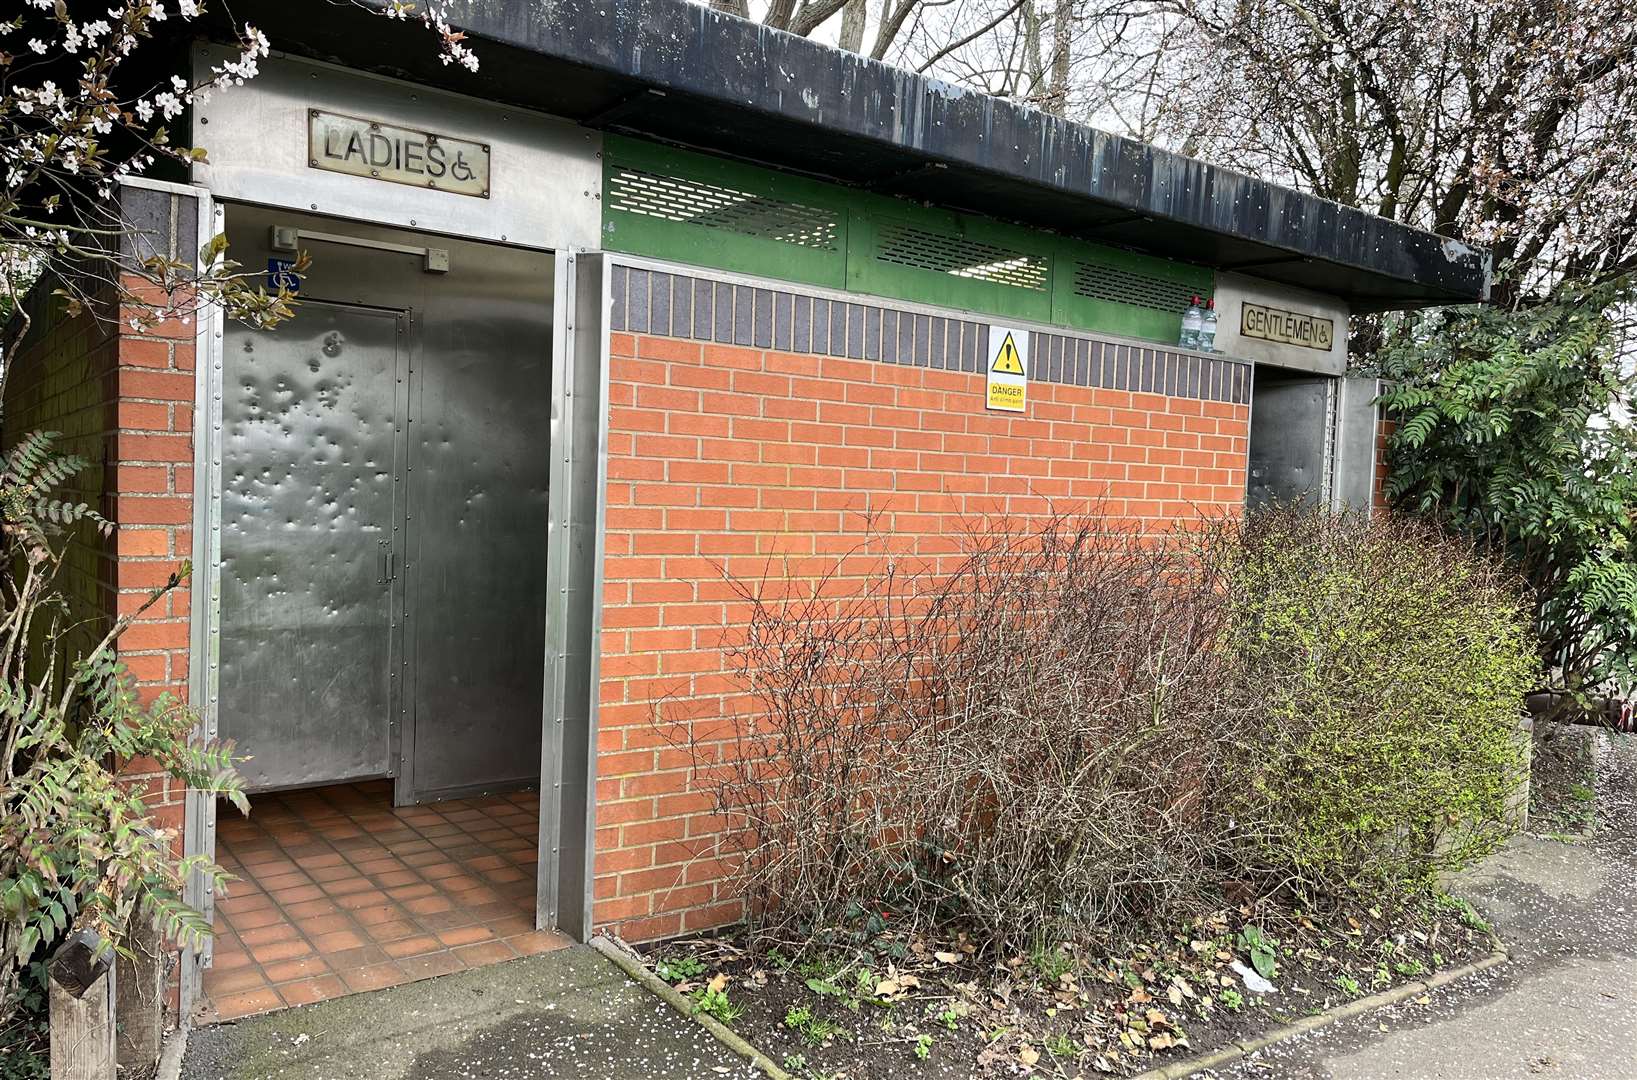 Needles were found in the toilets at Hesketh Park, in Pilgrims Way, Dartford